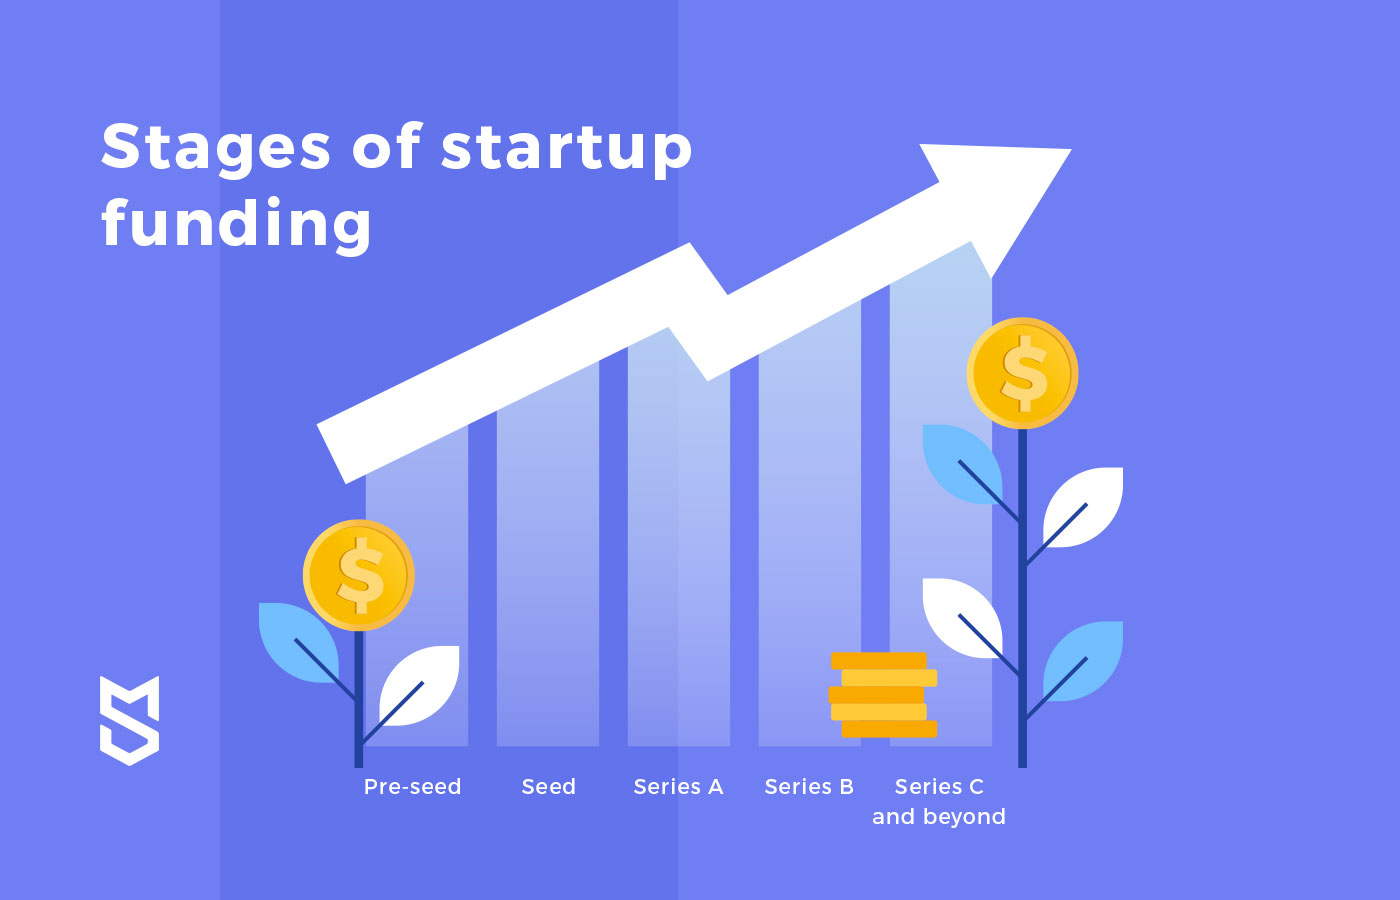 Stages of startup funding